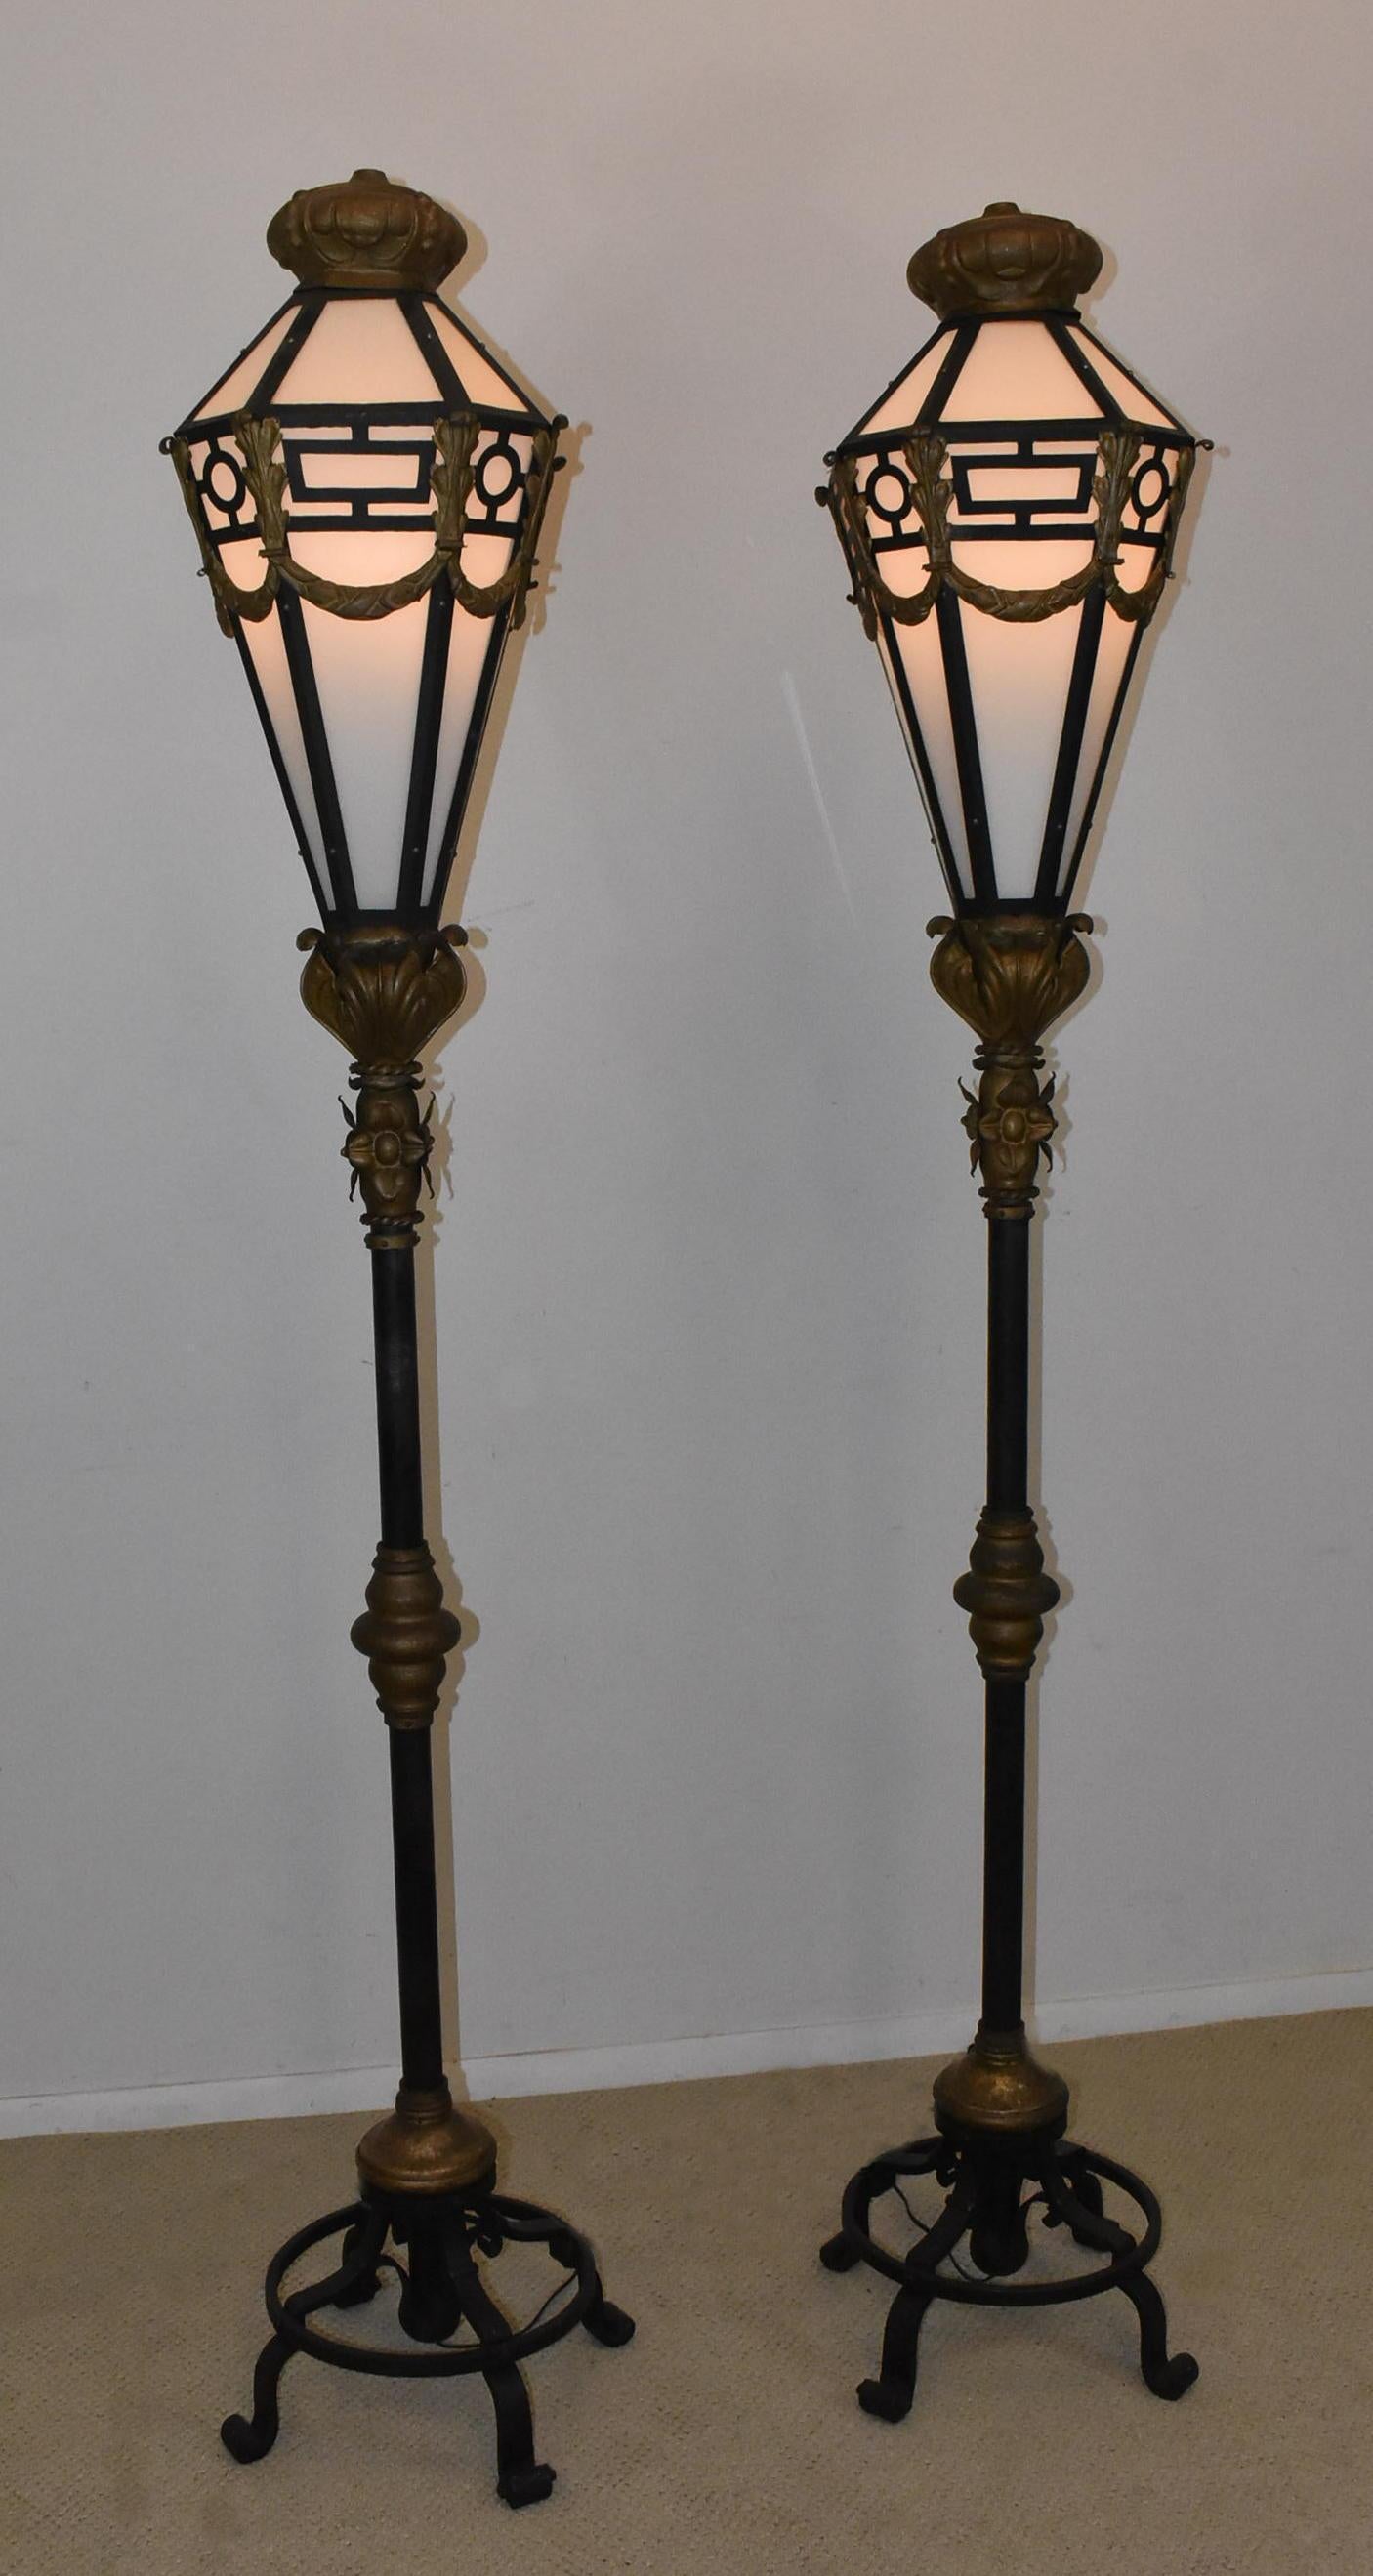 Pair of heavy wrought iron and brass circa 1910 street lights / lamps. Hammered surface with decorative applied pieces. Shades are 30